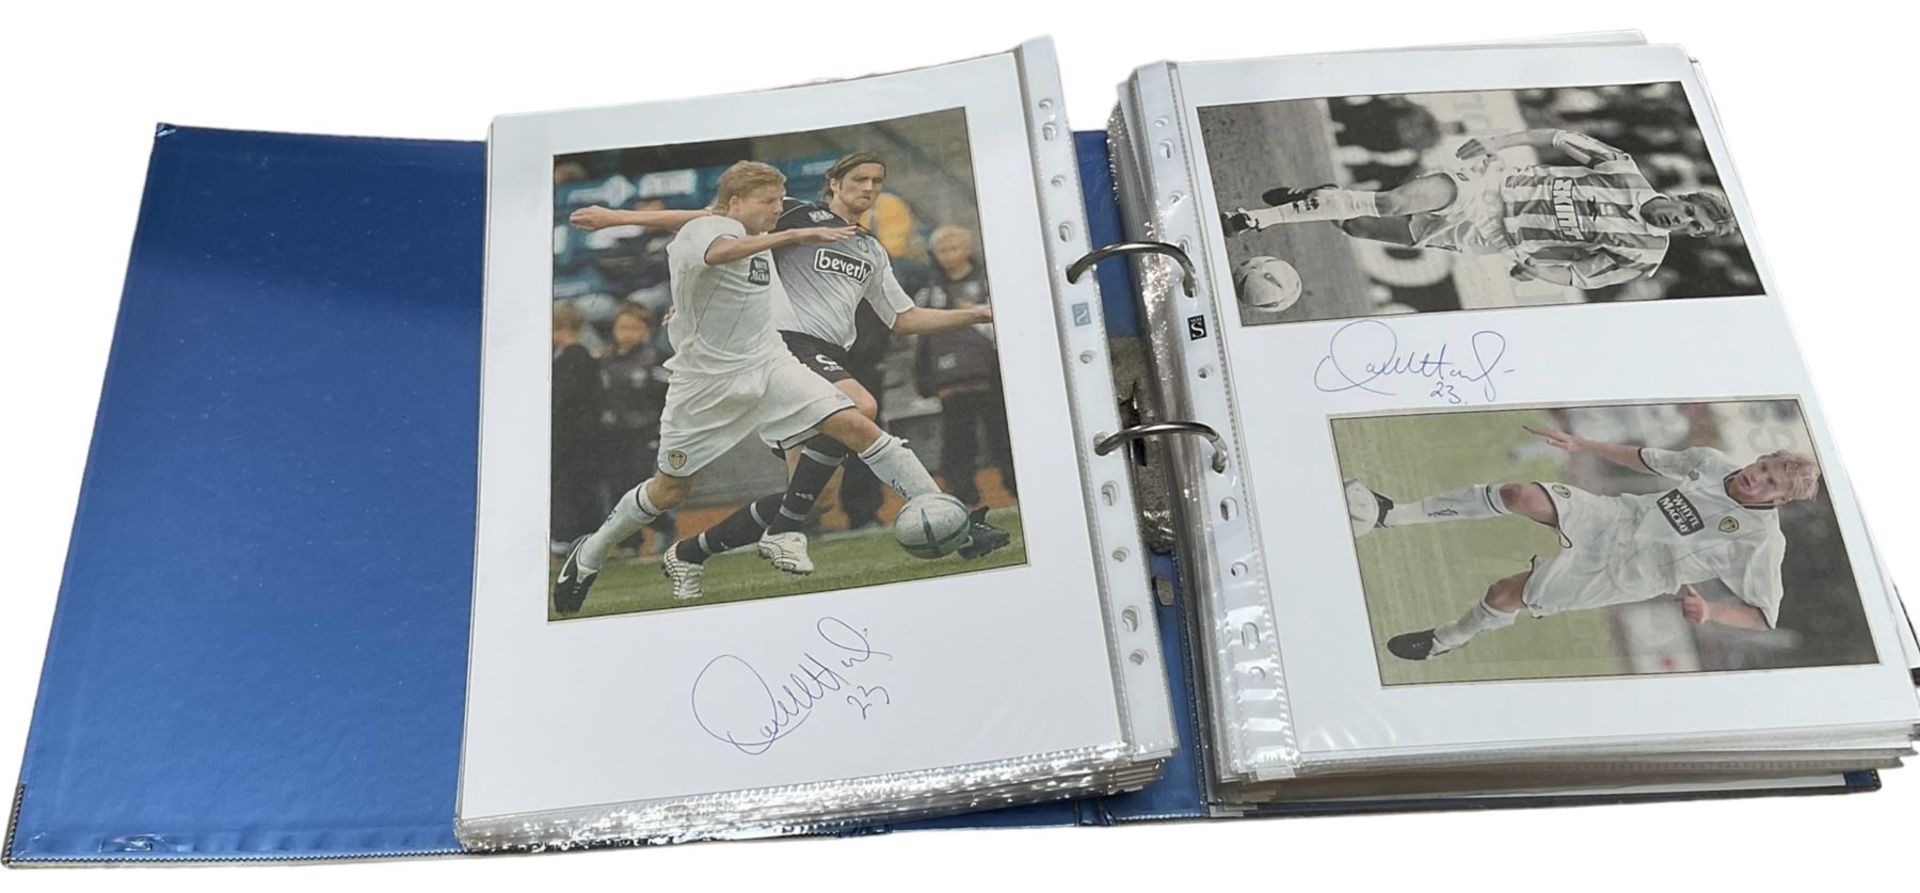 Leeds United football club - various autographs and signatures including Neil Sullivan - Image 7 of 8